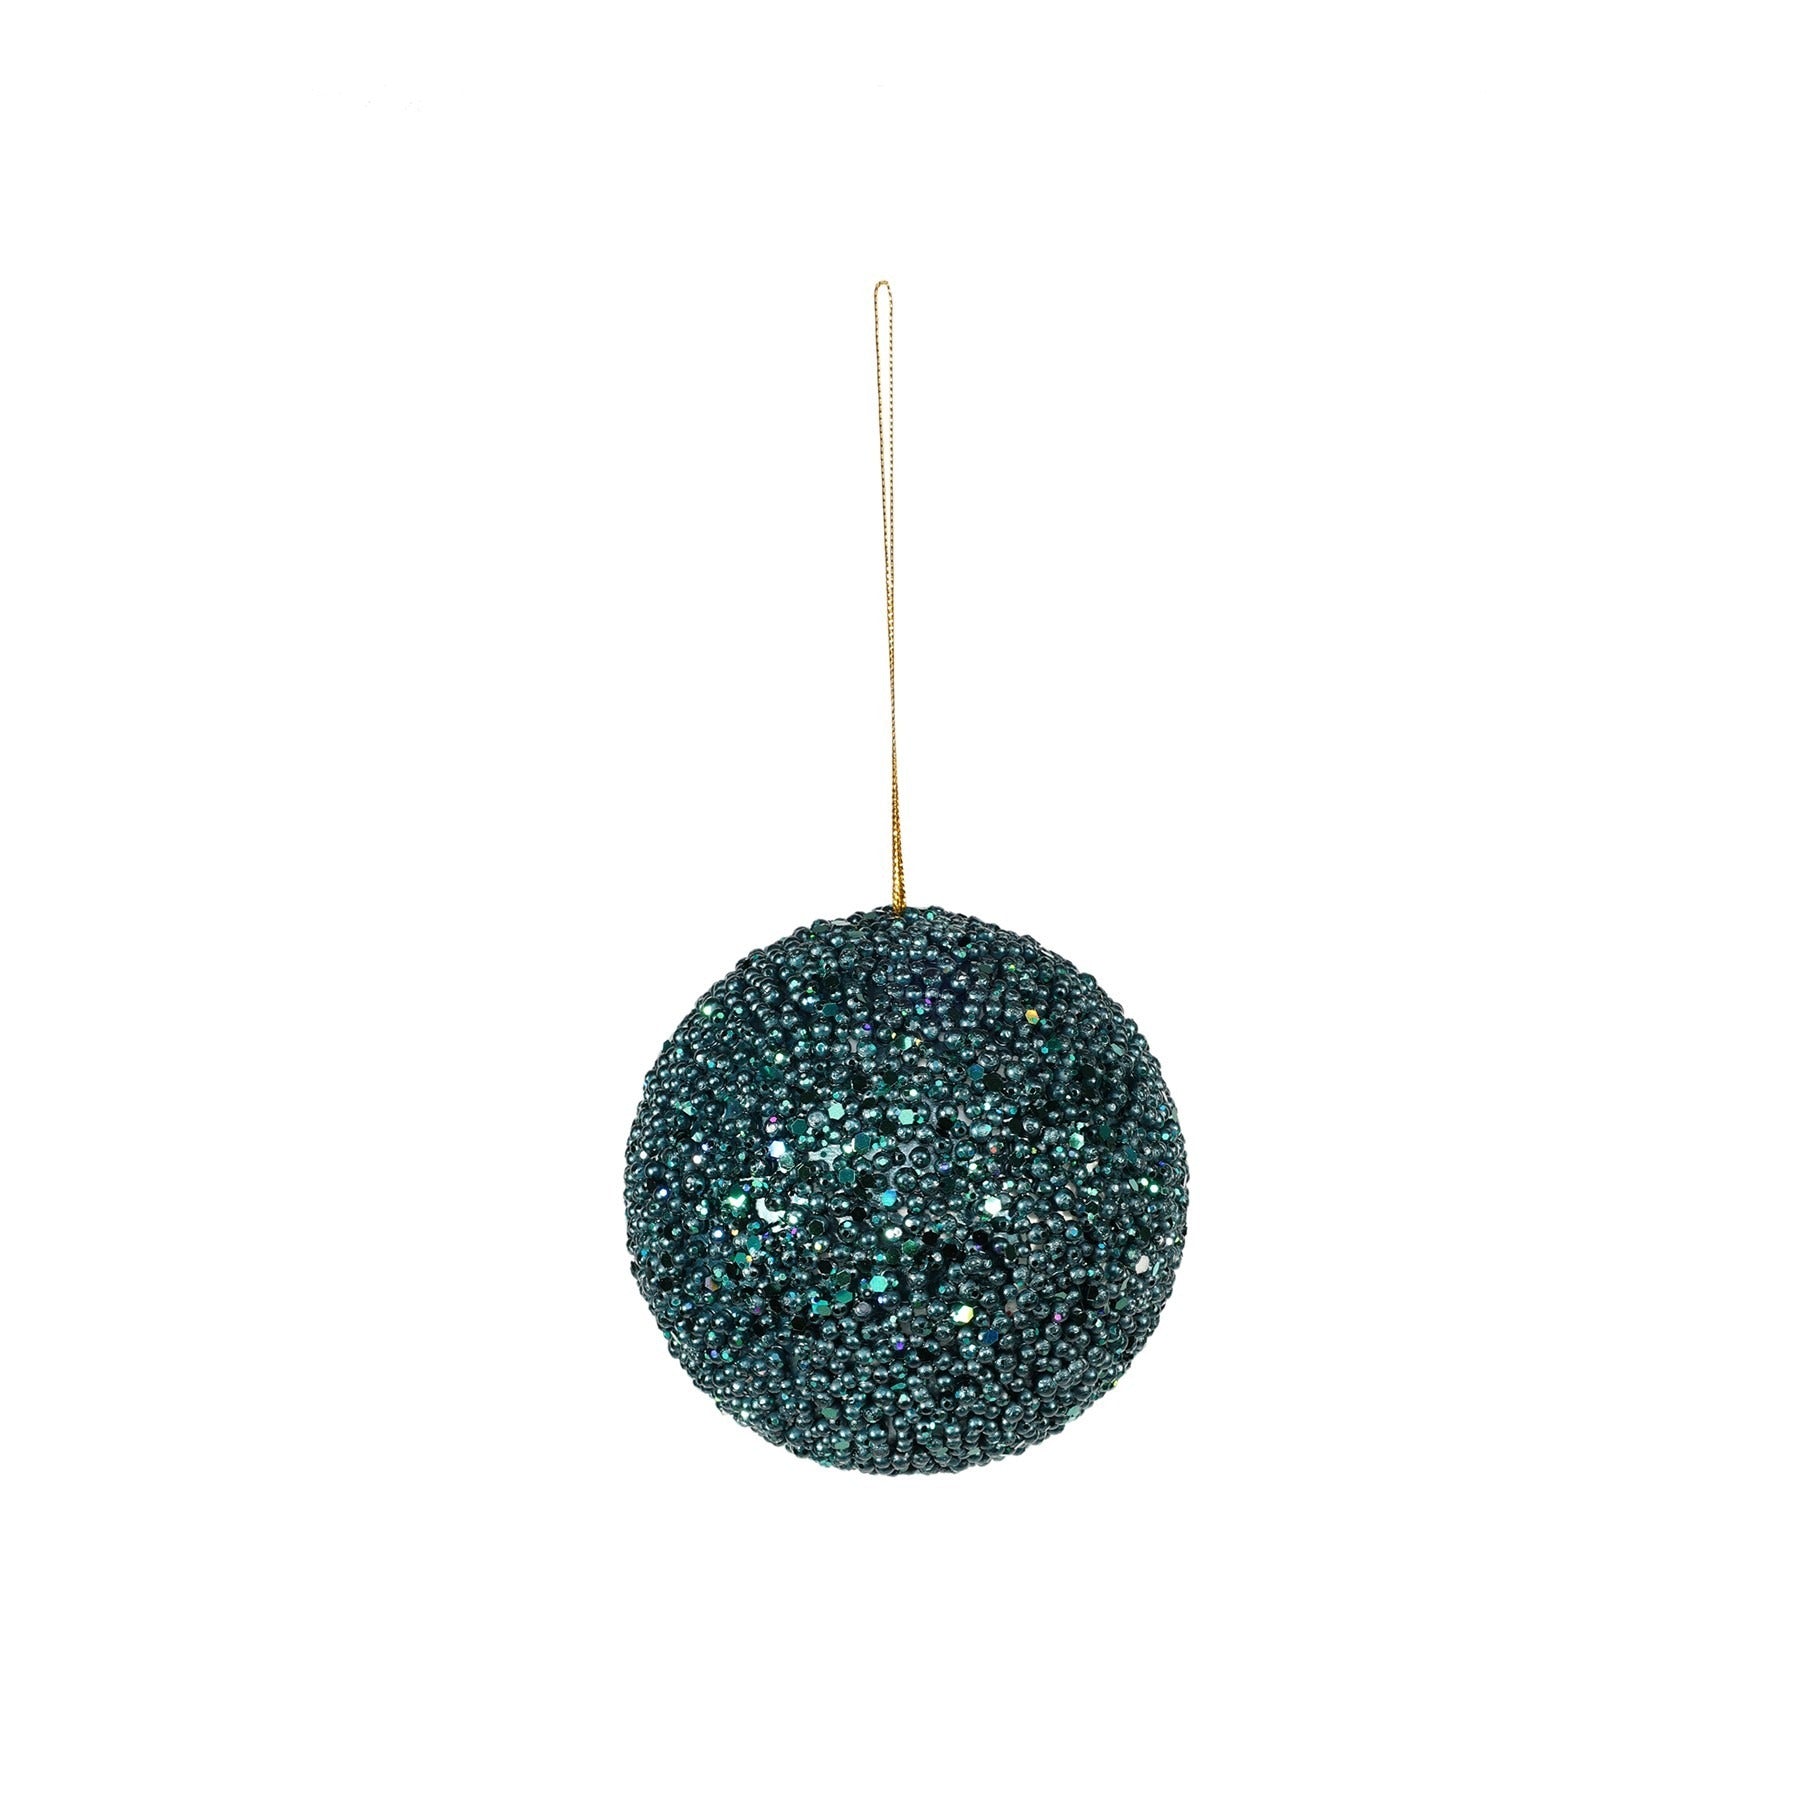 View Peacock Glitter Bauble Dia10cm information